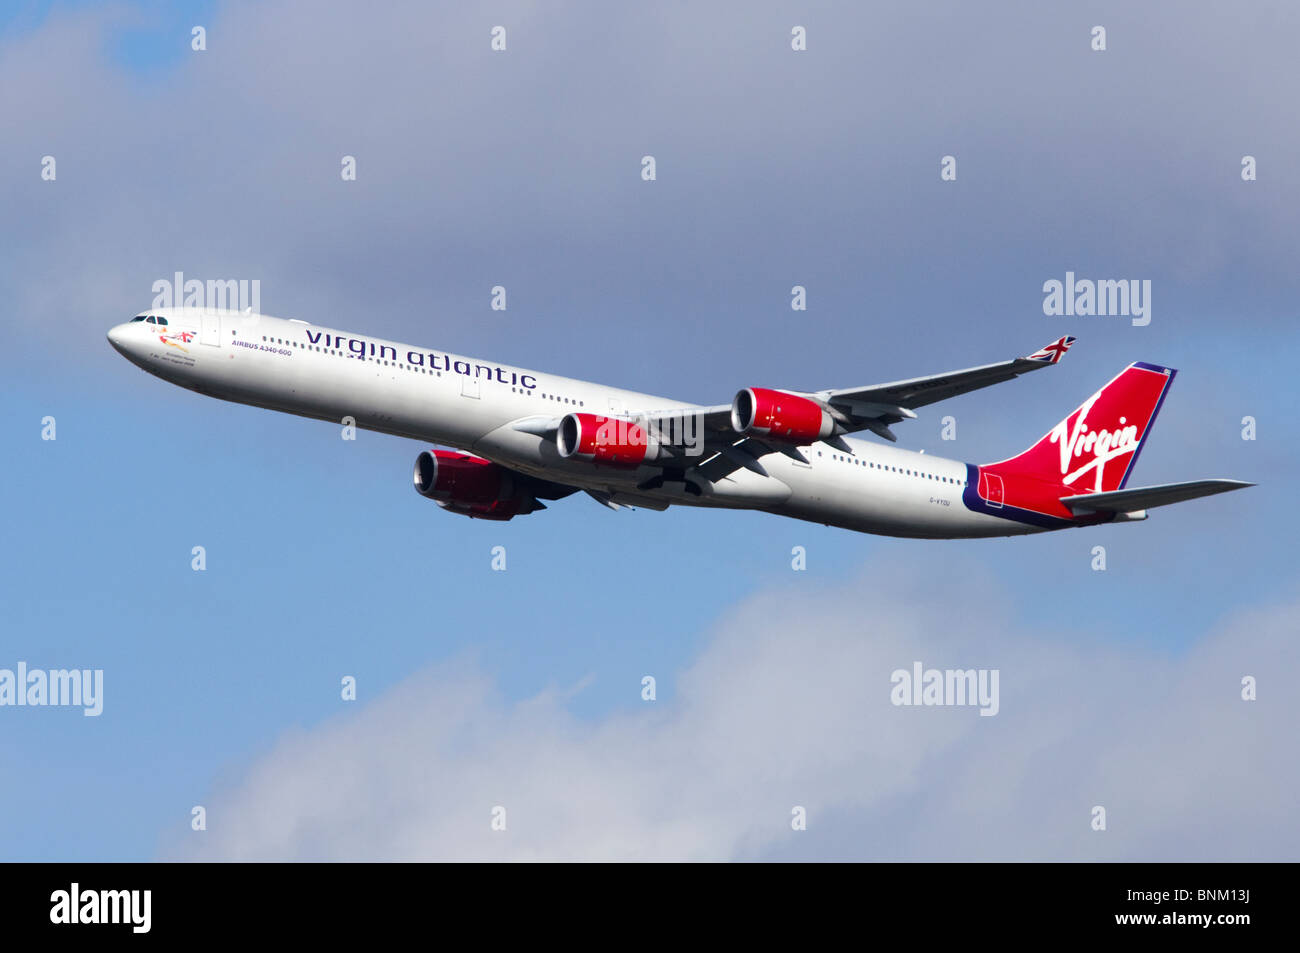 Airbus A340 operated by Virgin Atlantic climbing out after take off from London Heathrow Airport, UK. Stock Photo